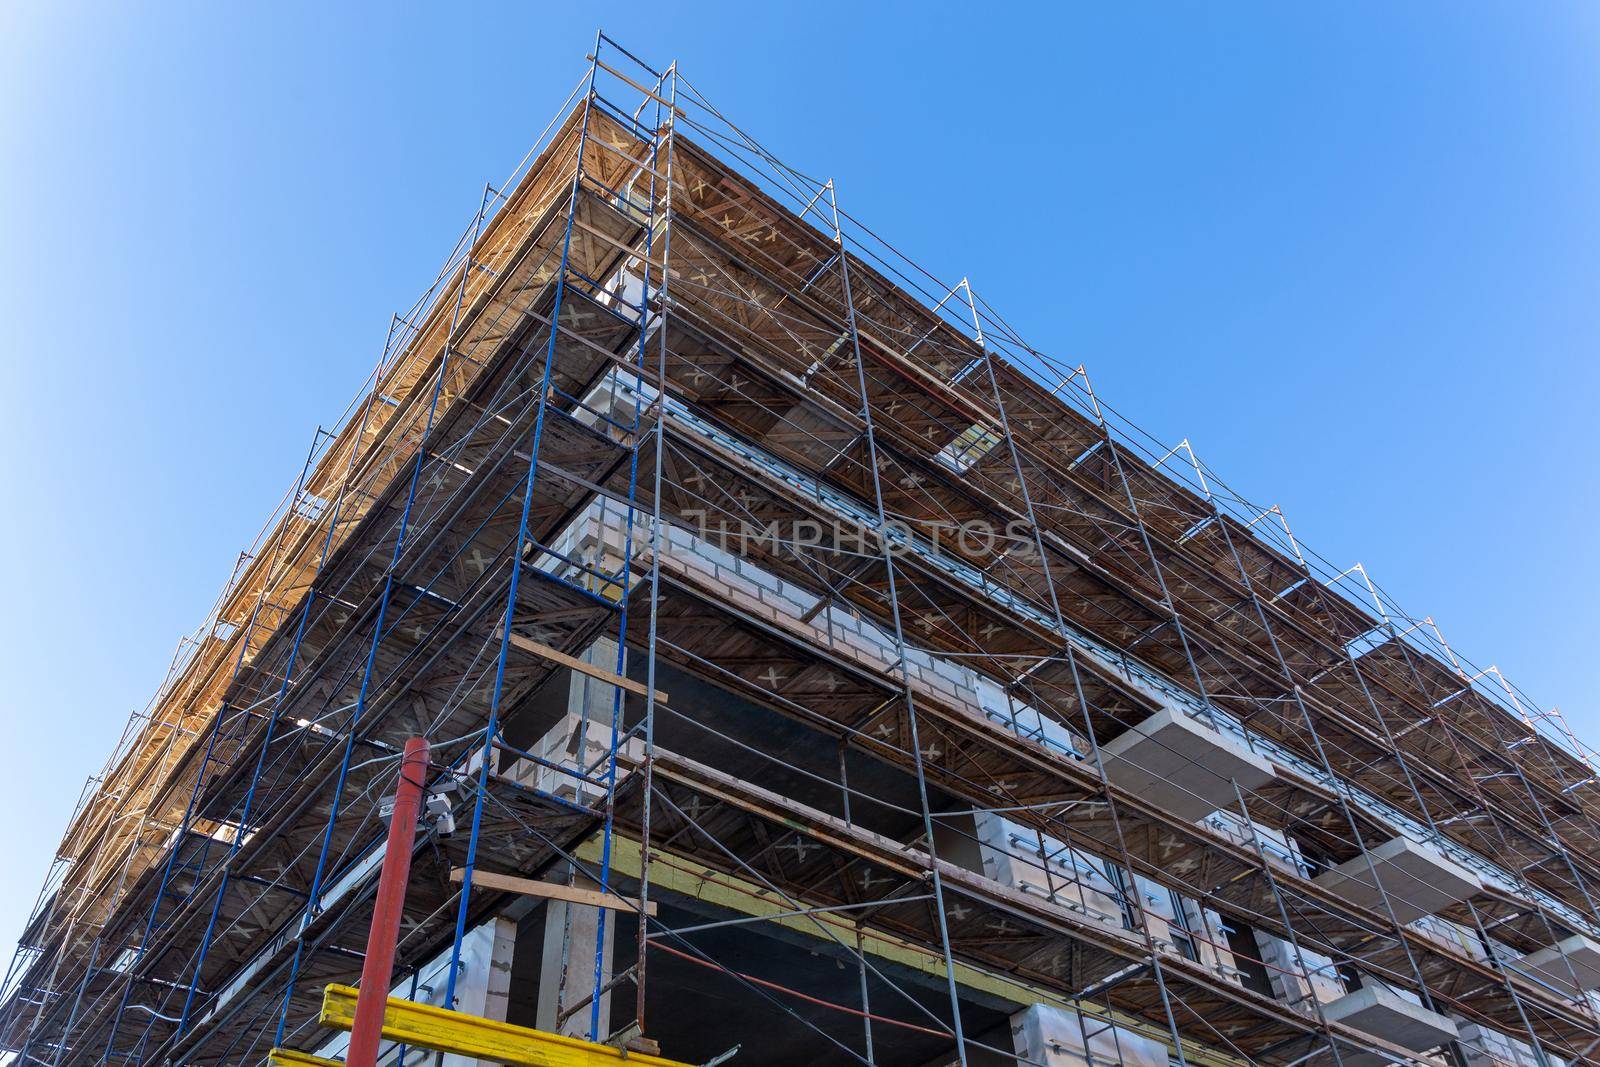 Insulation of the exterior walls of a building under construction. The walls of the building under construction are surrounded by scaffolding for workers to access. Exterior finishing works.